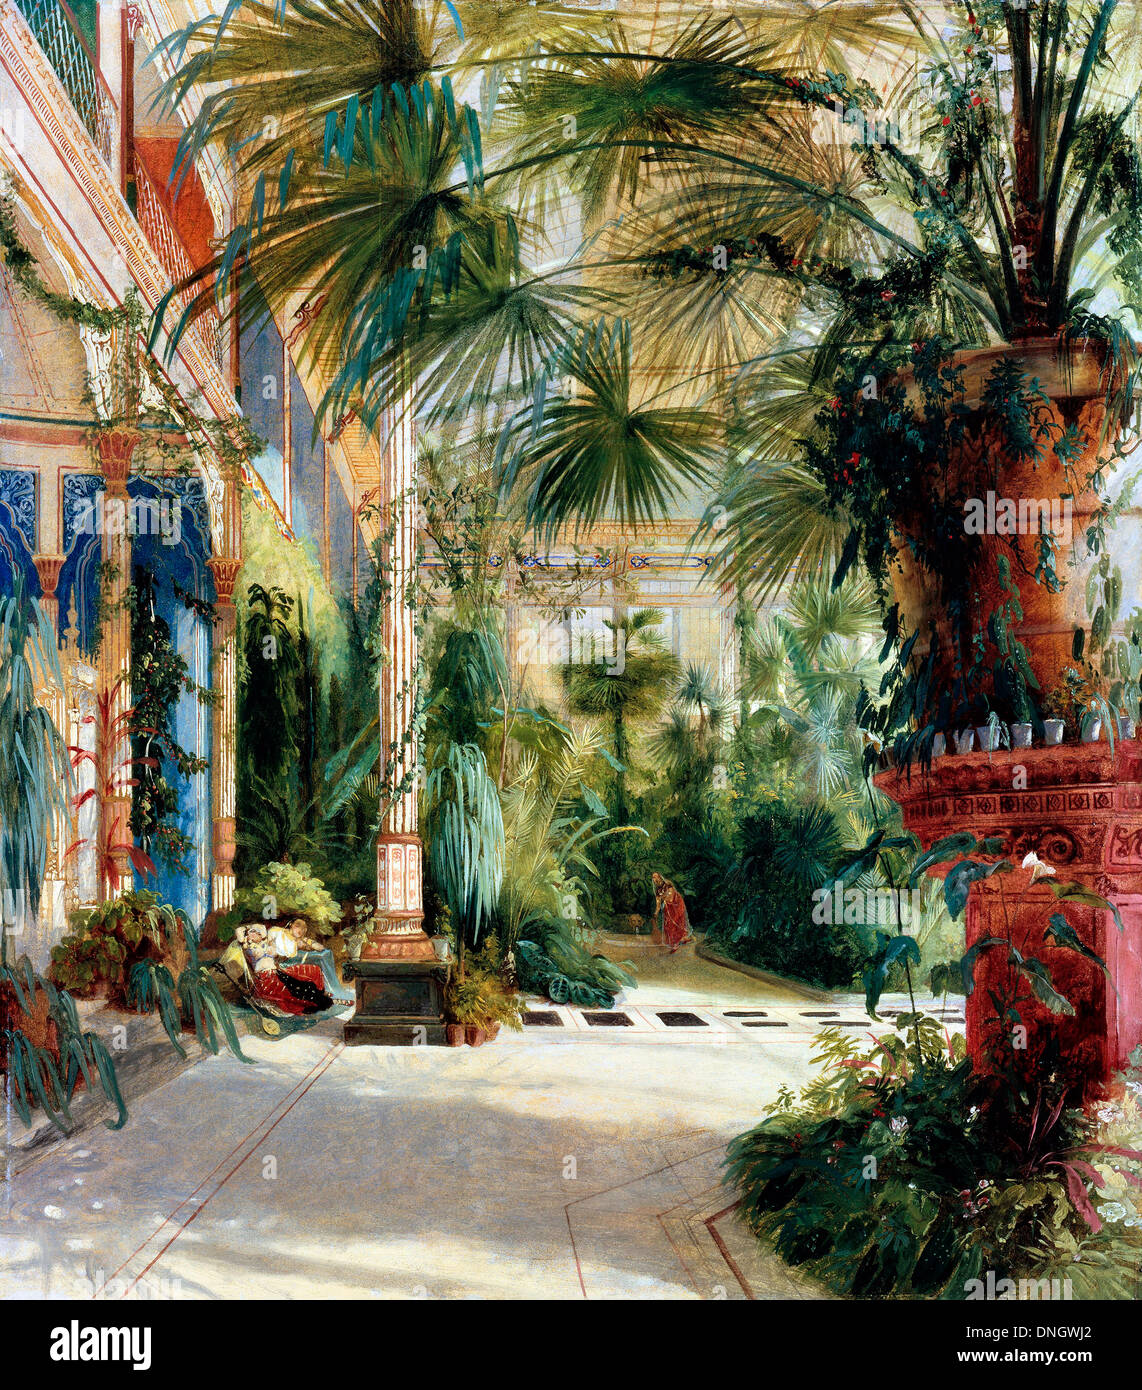 Carl Blechen, The Interior of the Palm House 1832 Oil on canvas. Alte Nationalgalerie, Berlin, Germany. Stock Photo